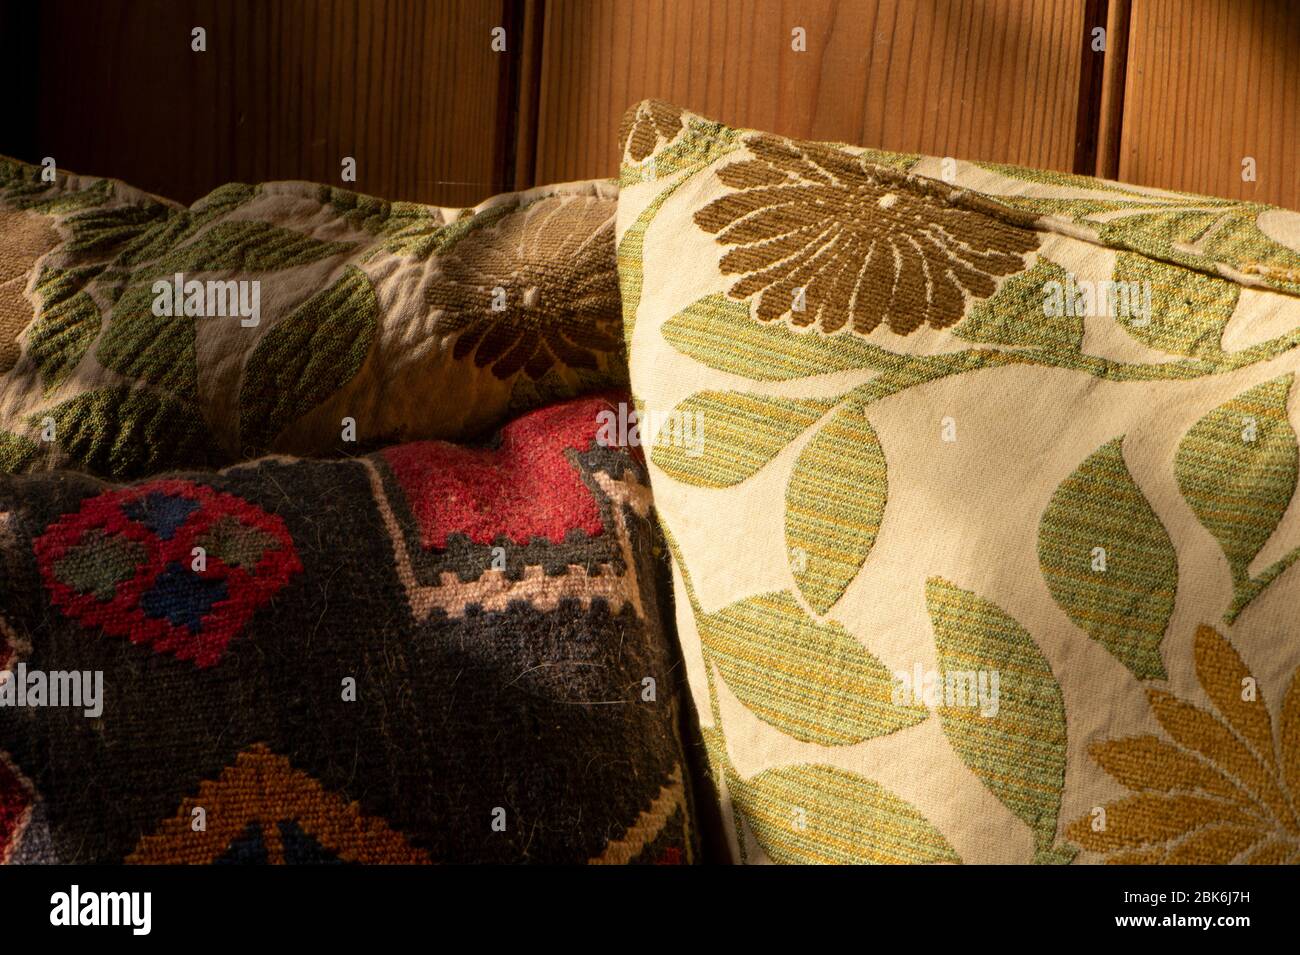 cushions on a pine settle Stock Photo